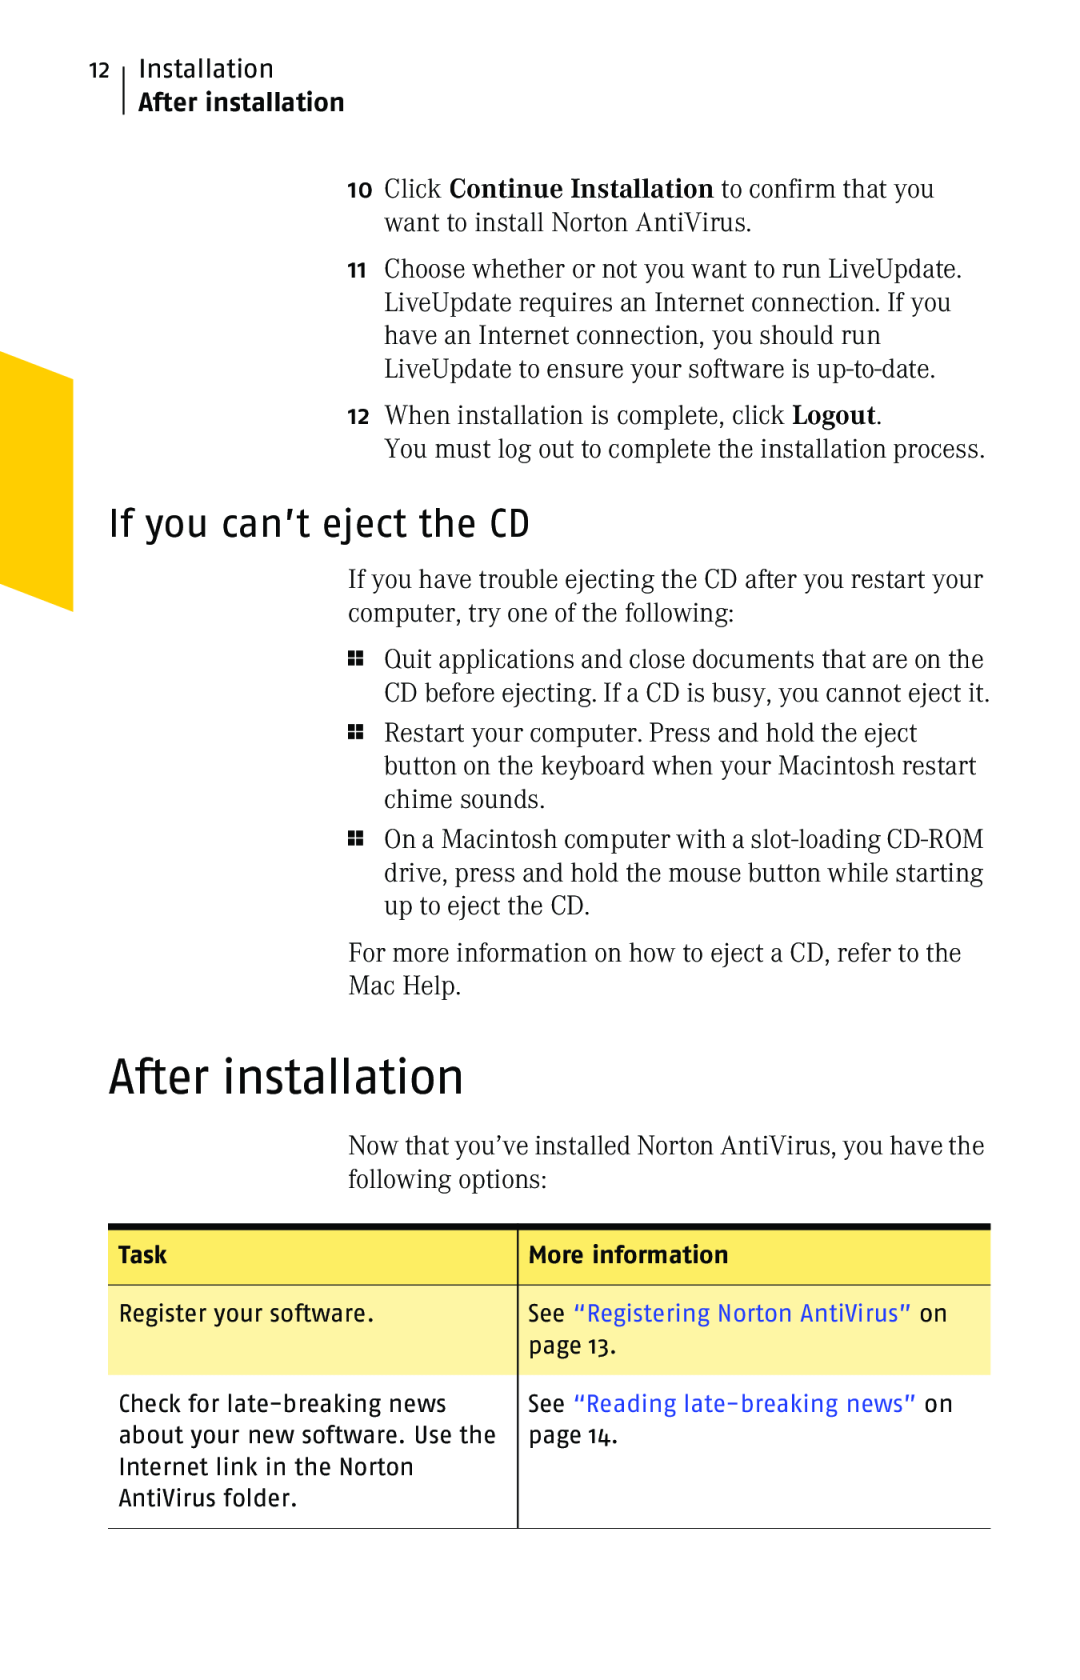 Symantec 10 manual After installation, If you can’t eject the CD 